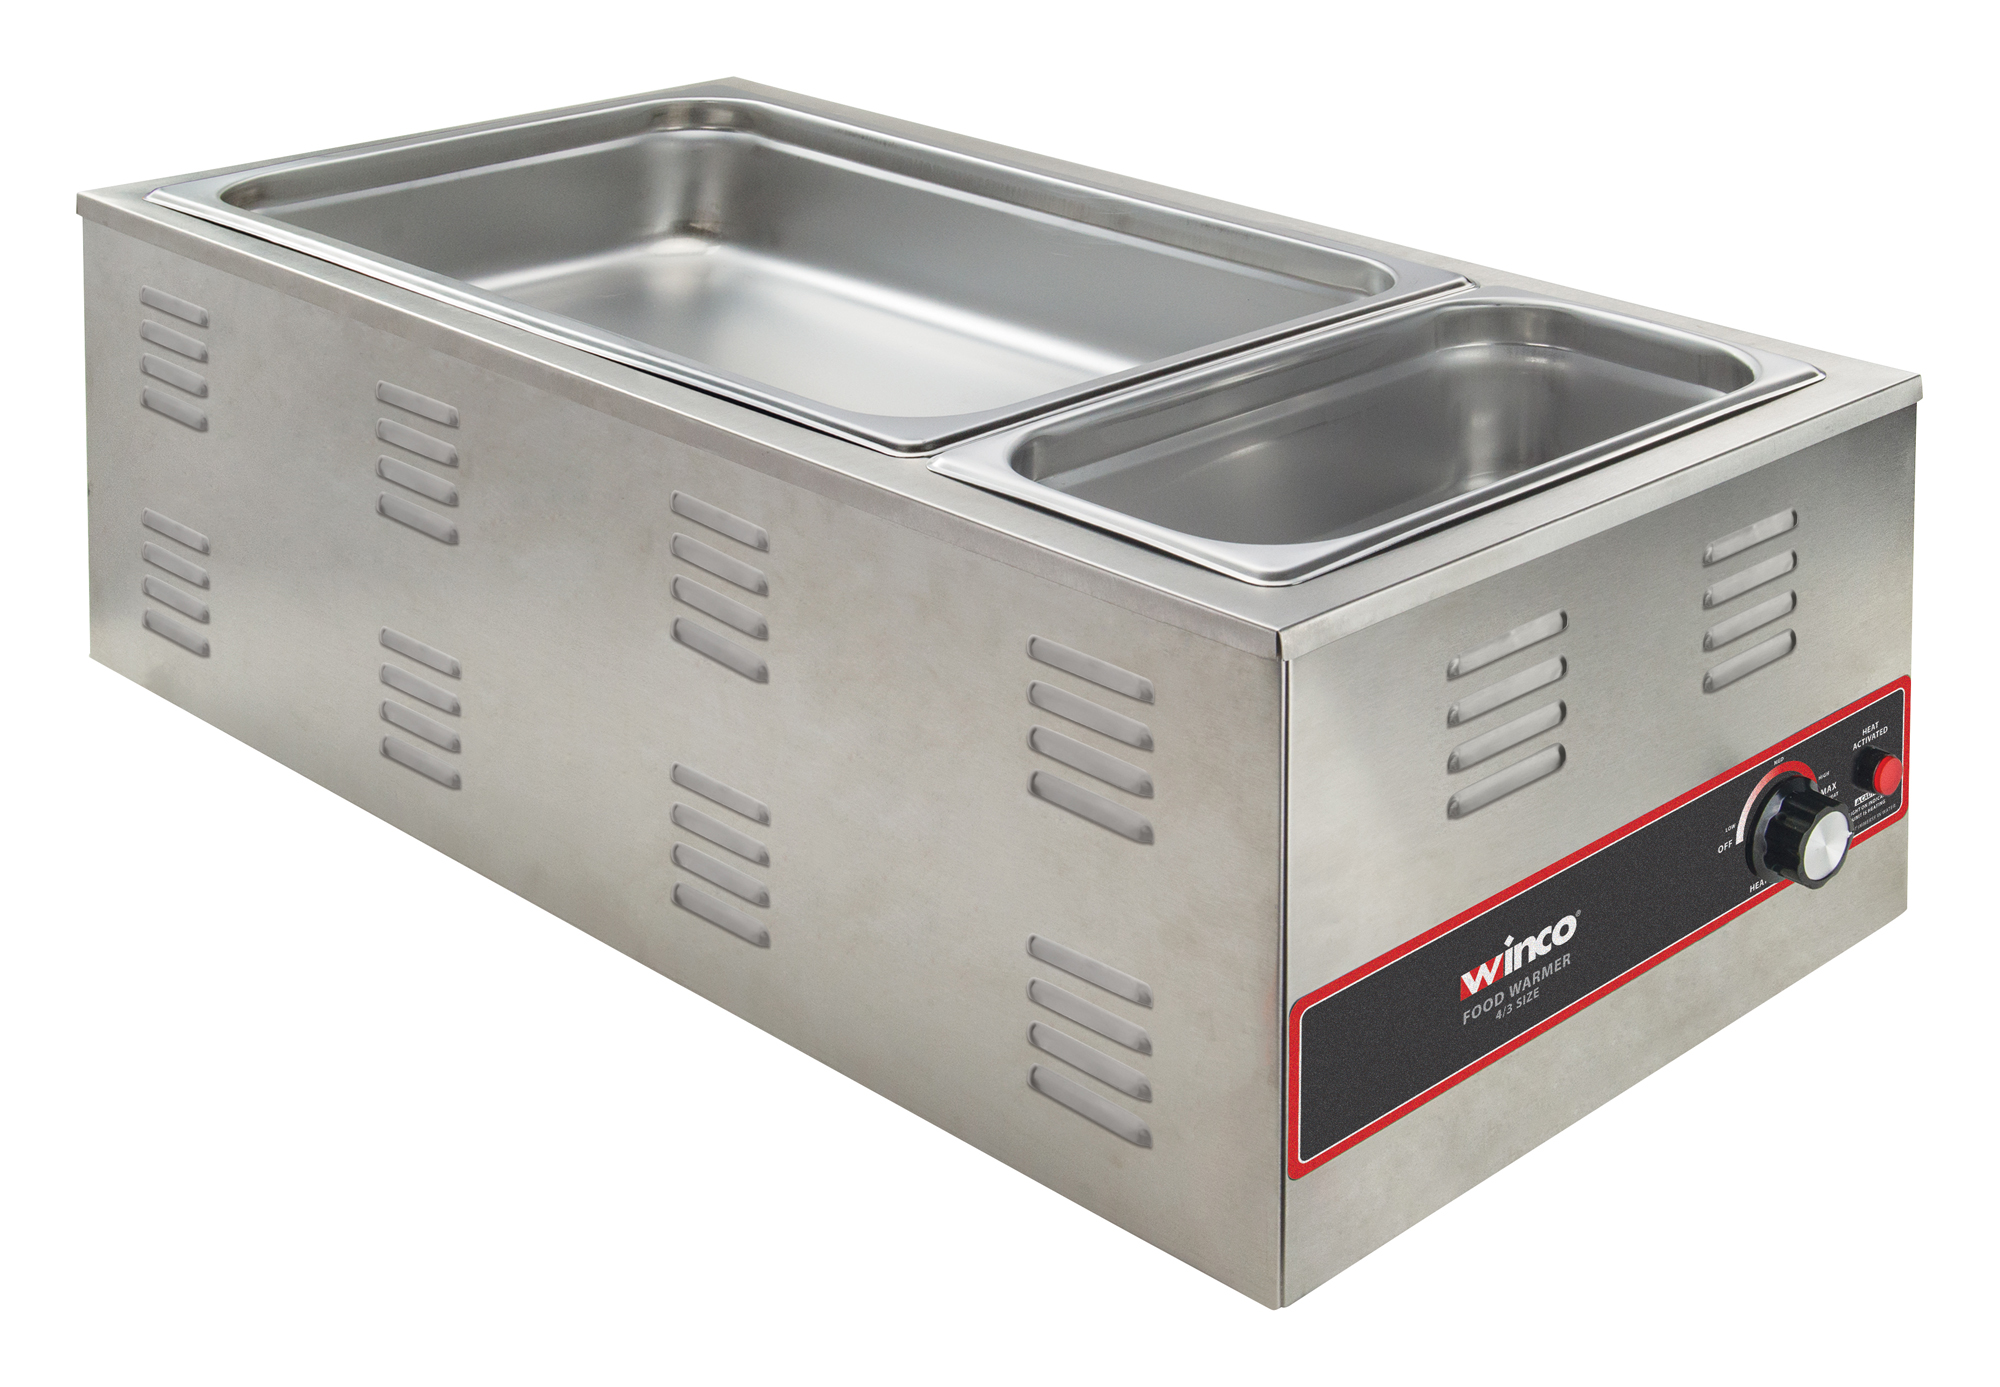 Food Warmer, electric,
4/3 size, 14-5/8&quot;W x 29-3/4&quot;D
x 10-11/16&quot;H, rectangular,
countertop, wet operation
only, 11-13/16&quot;W x
27&quot;D x 6-5/16&quot;H well opening,
accommodates (4) 1/3 size
steam table pans (and other
configurations), dial control,
graduated heat settings (low:
140F; medium: 170F; high:
200F),
dedicated indicator light,
stainless steel body,
120v/50/60/1-ph, 1.5 kW, 12.5
amp, NEMA 5-15P,
ETL-Sanitation, cETLus  One
year warranty, standard, each, 
11/21